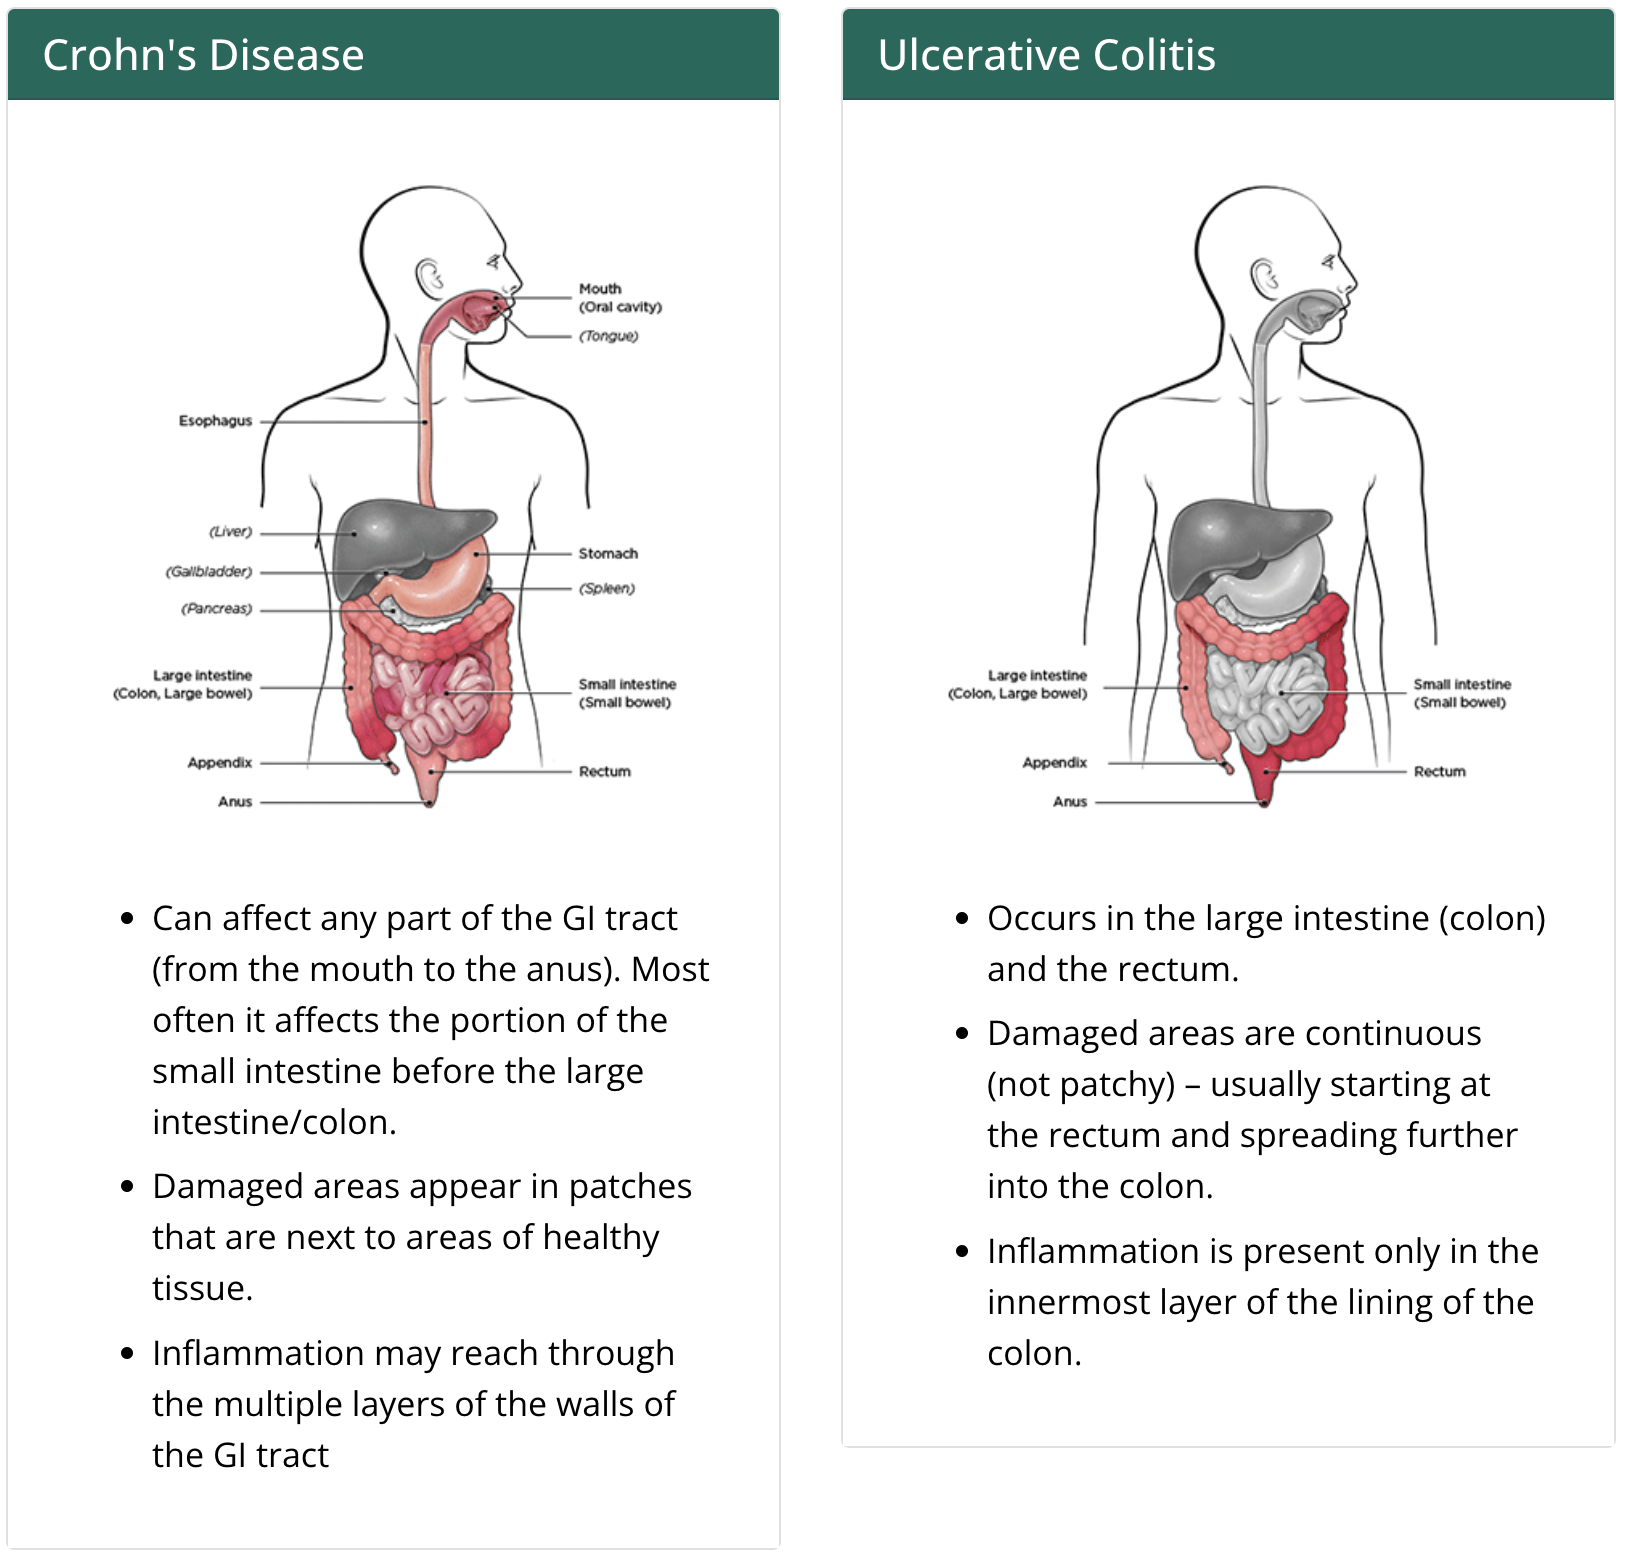 A side-by-side chart comparison of the 2 types of inflammatory bowel disease: crohn's disease and ulcerative colitis